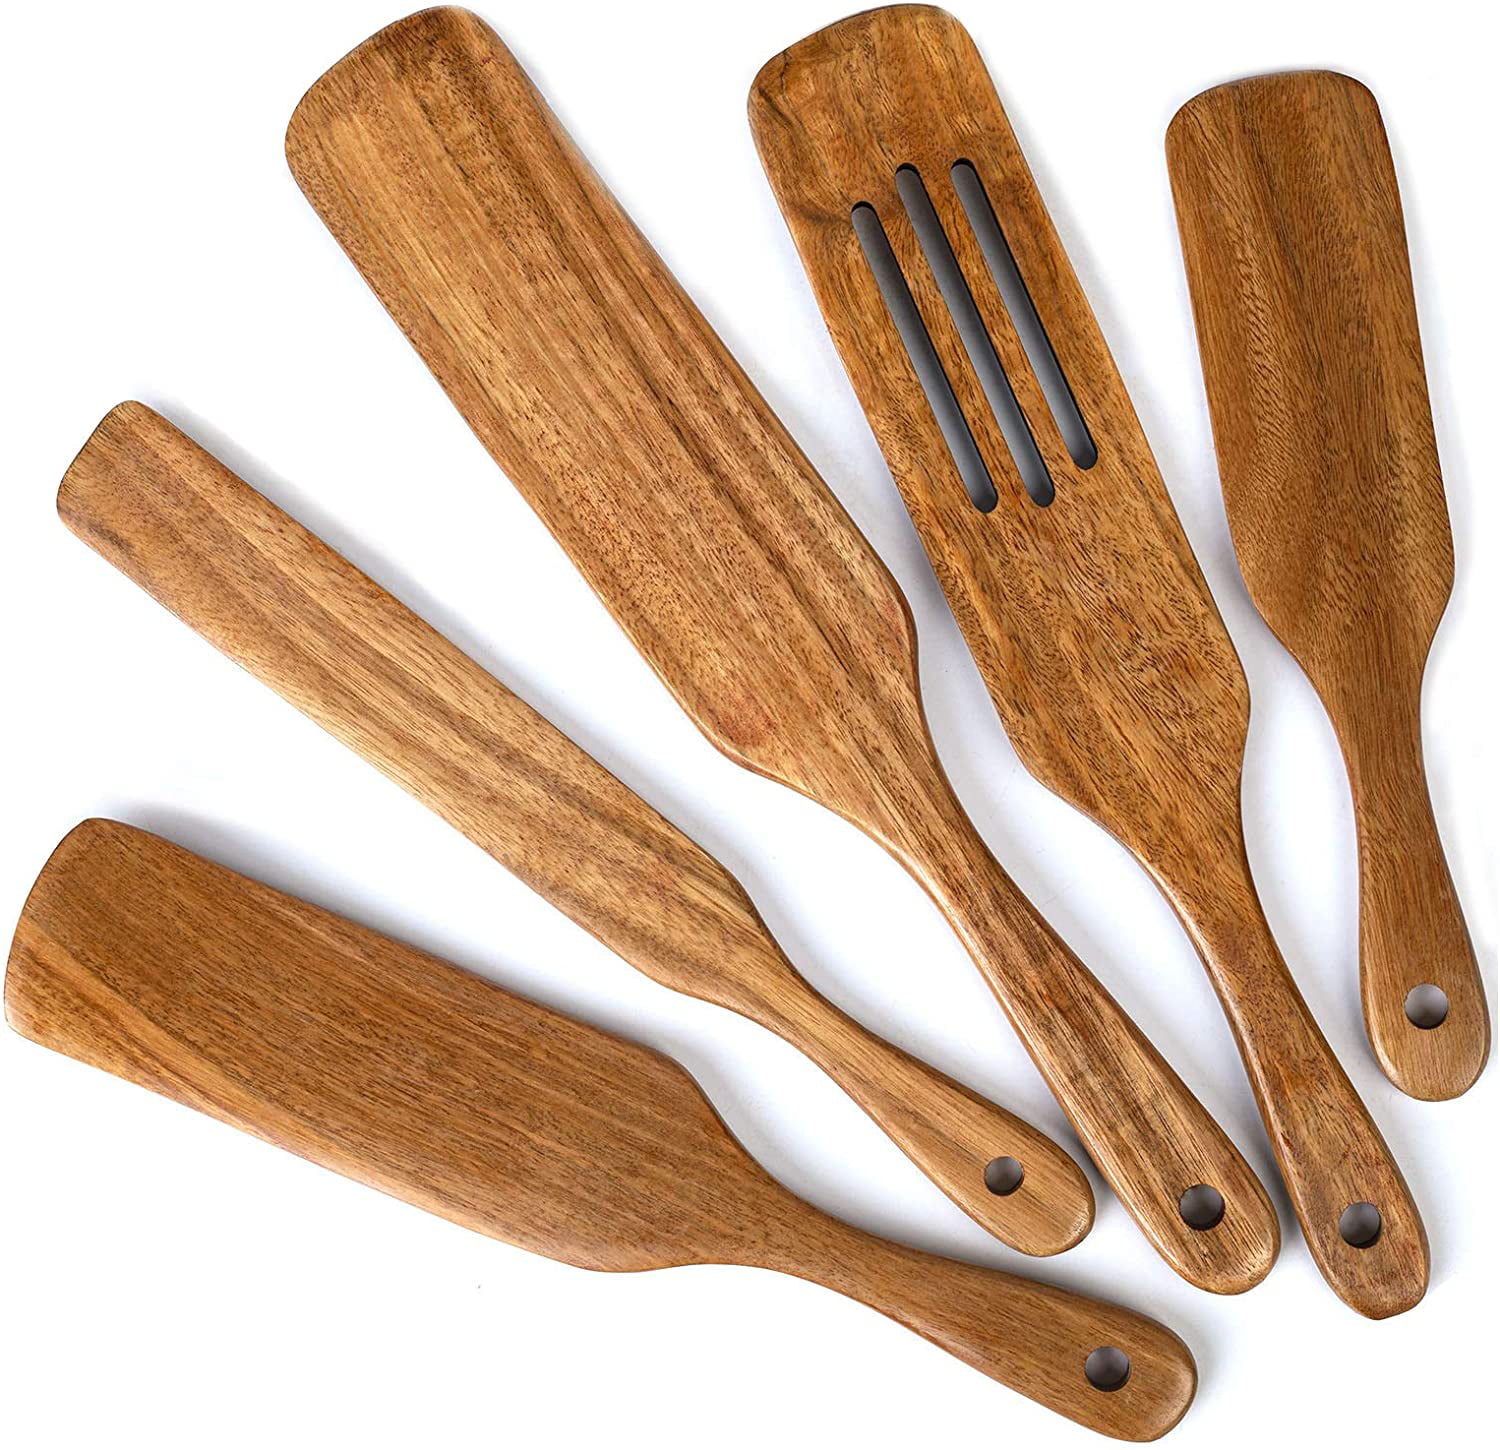 Mixing Serving Wooden Spoons For Cooking 4 Piece Spurtle Set Acacia Spurtle Kitchen Tool Wooden Spurtle Kitchen Utensils Slotted Spurtle Spatula Sets For Stirring 